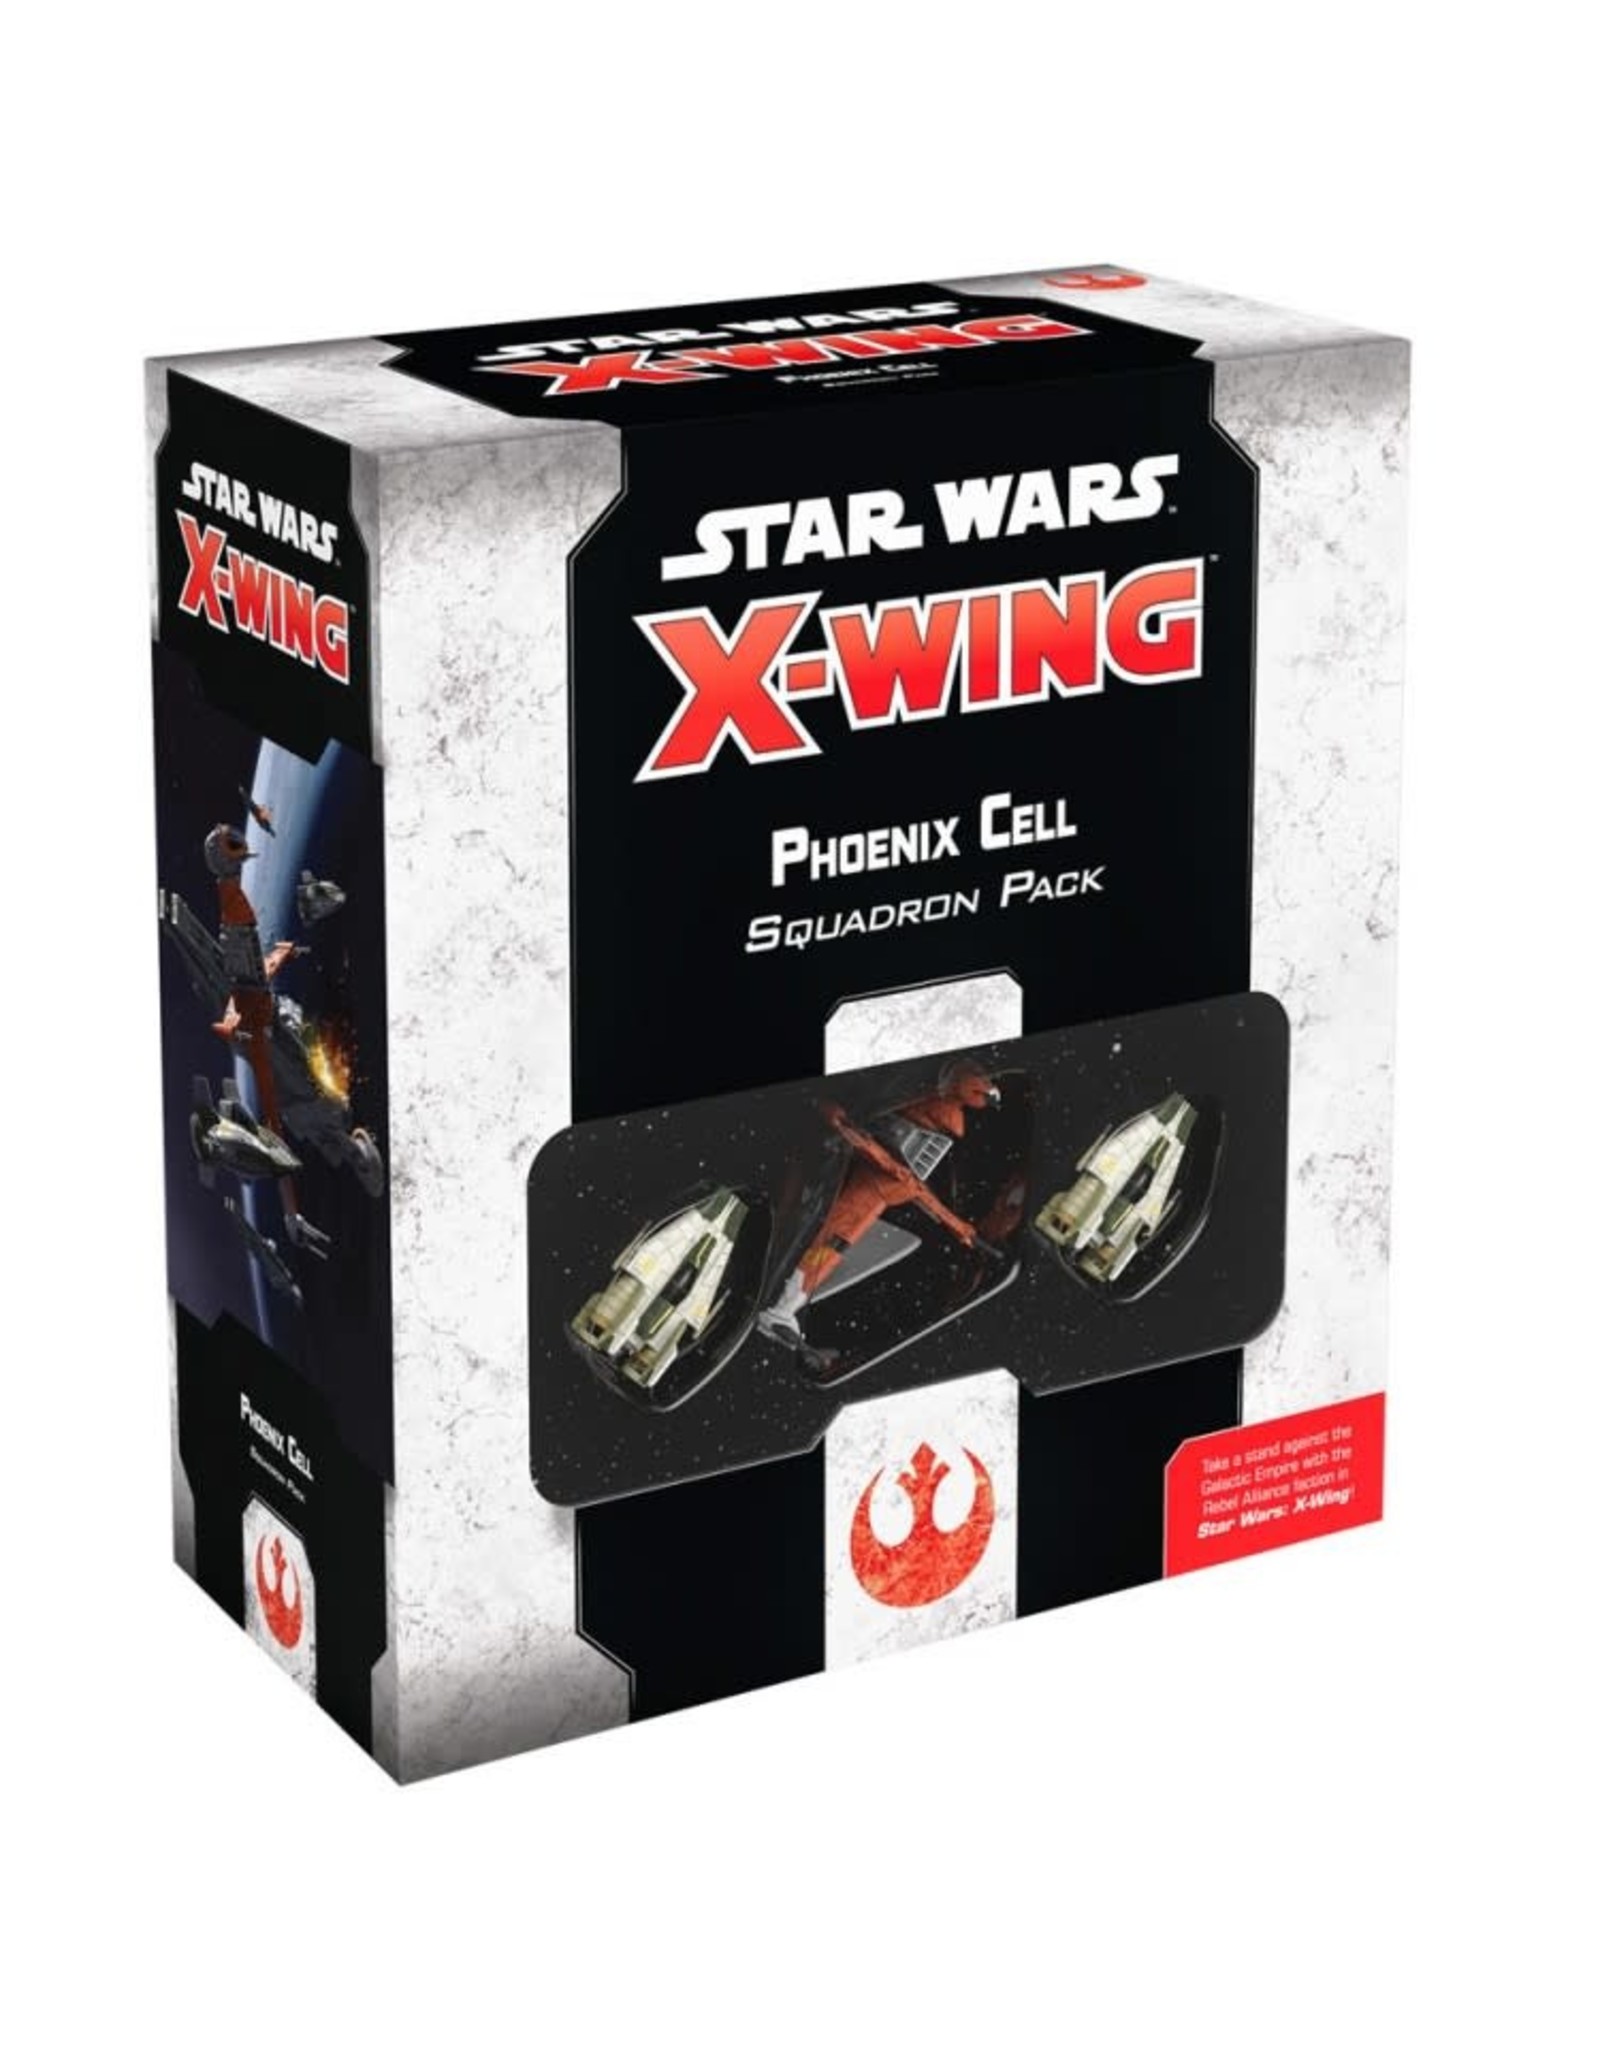 Fantasy Flight Games Star Wars: X-Wing 2nd Edition - Phoenix Cell Pack